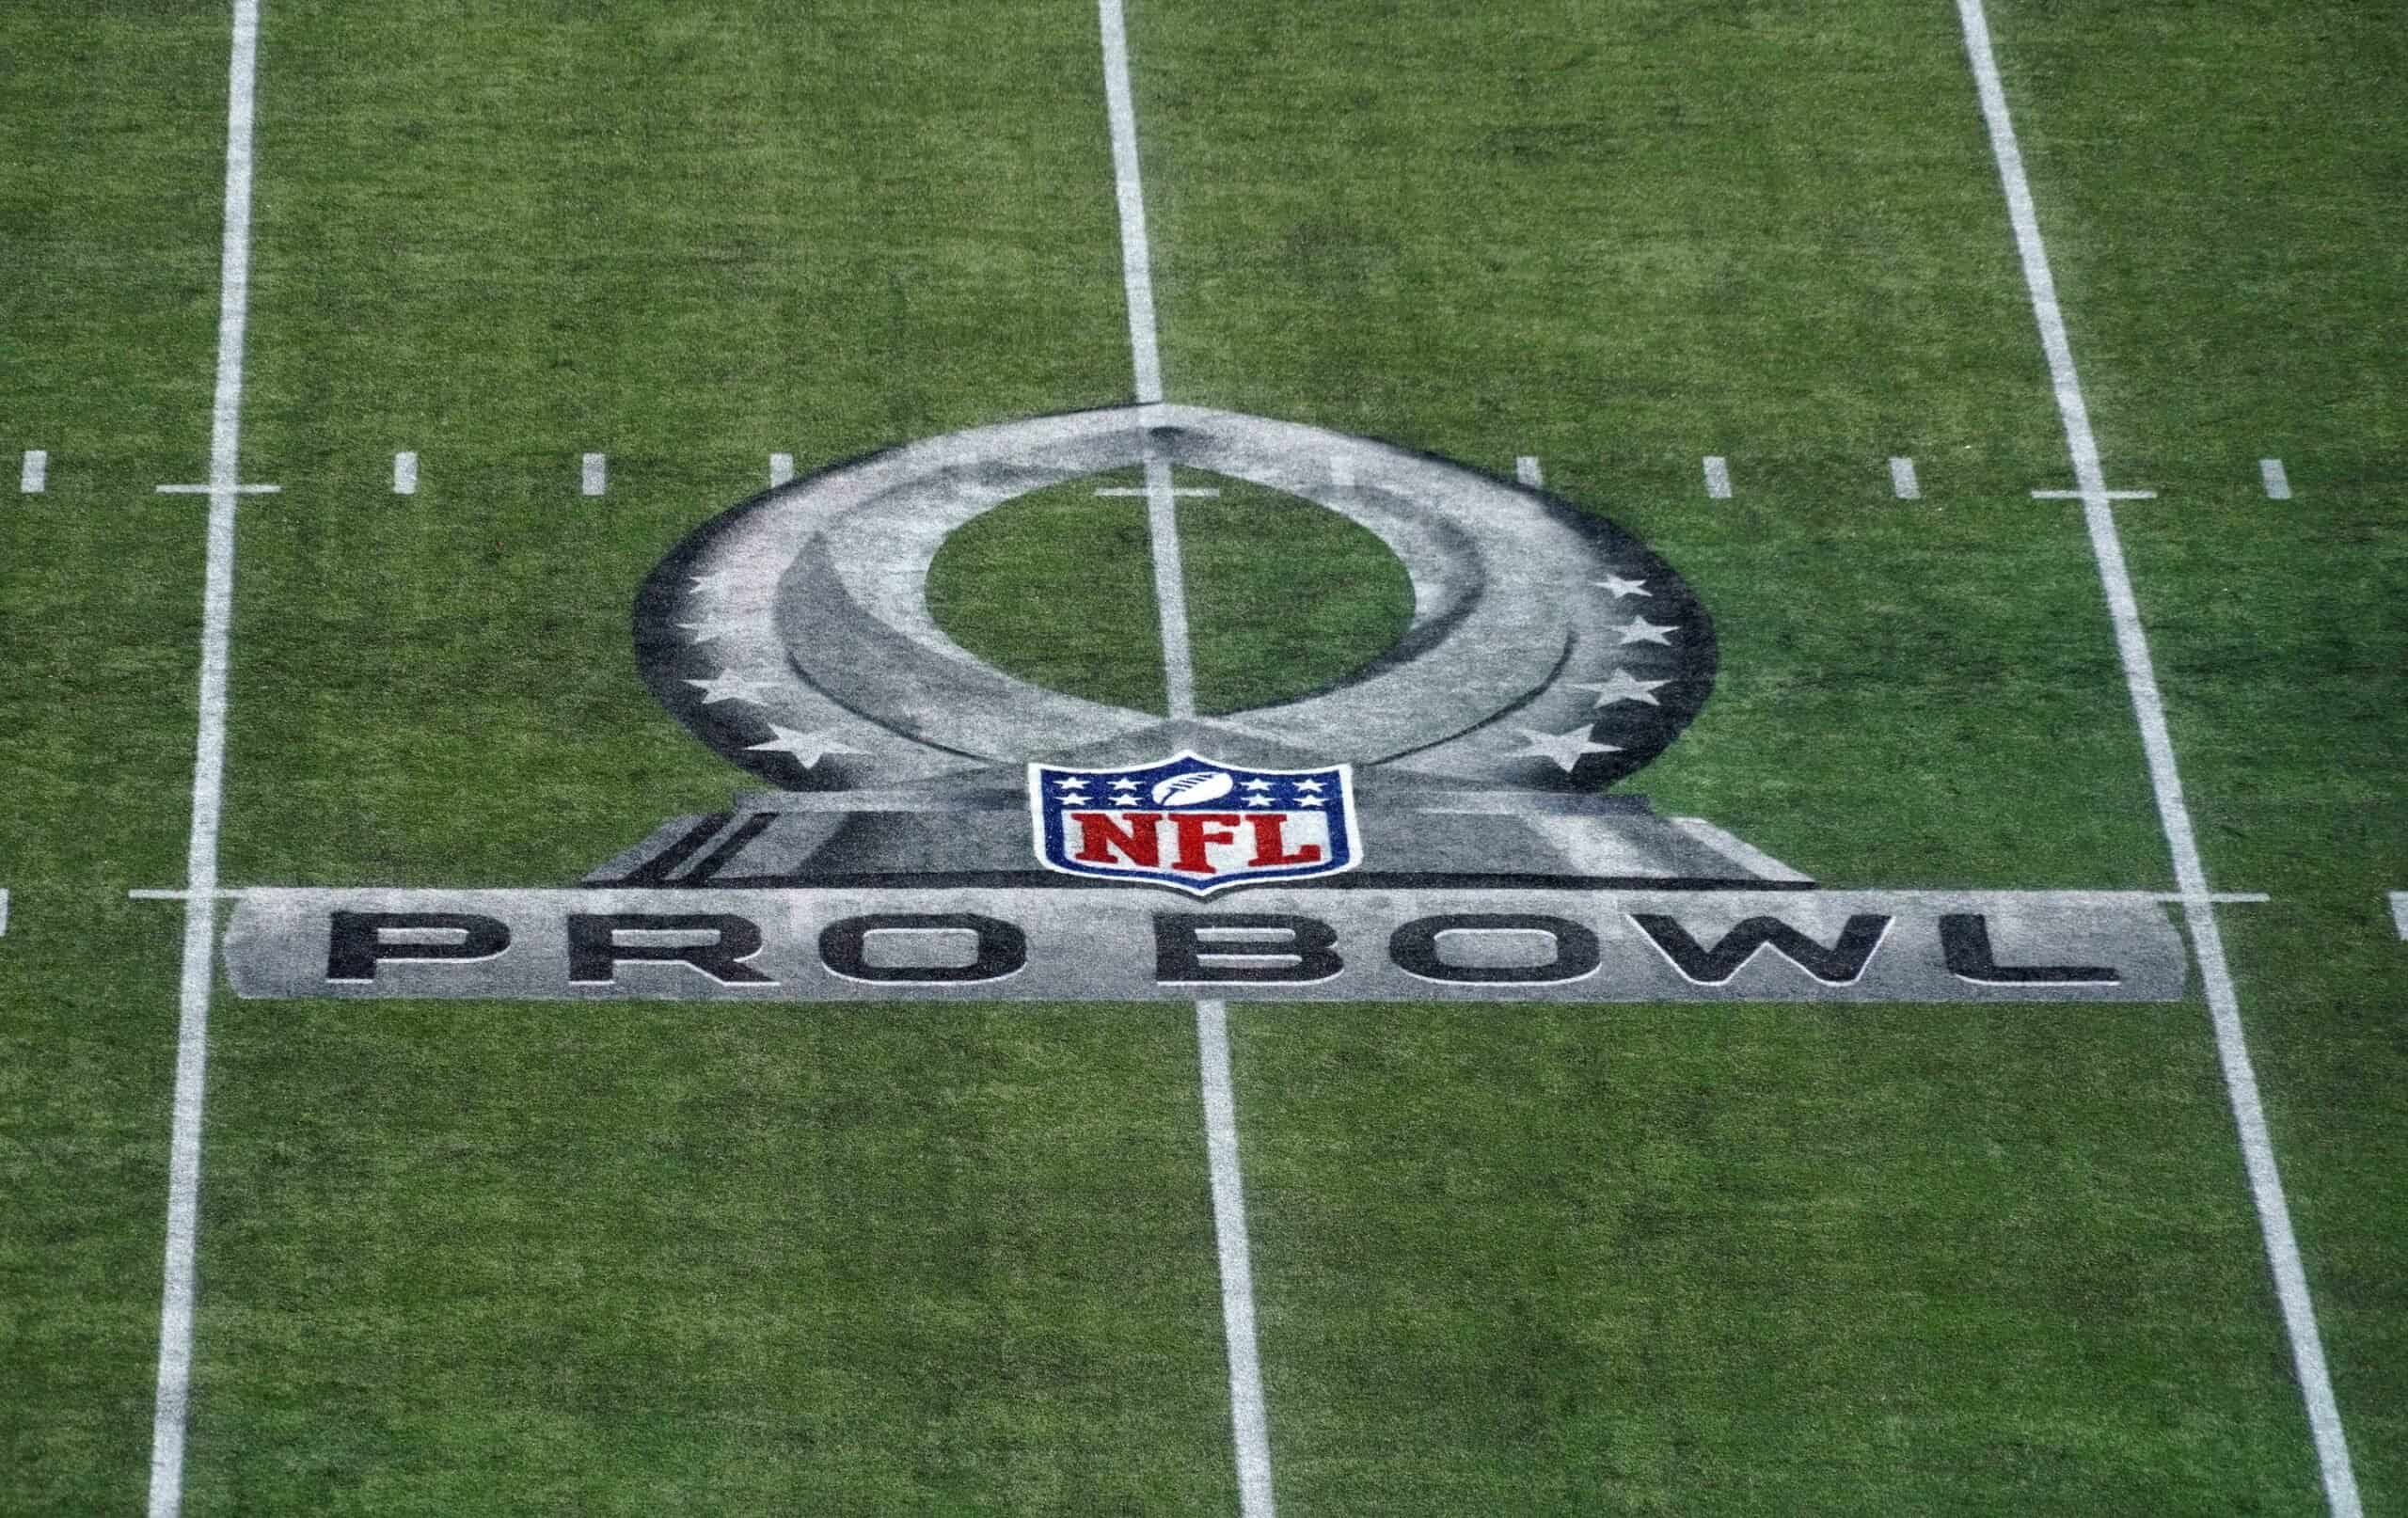 NFL Pro Bowl 2020: Live score updates, TV channel, odds, how to